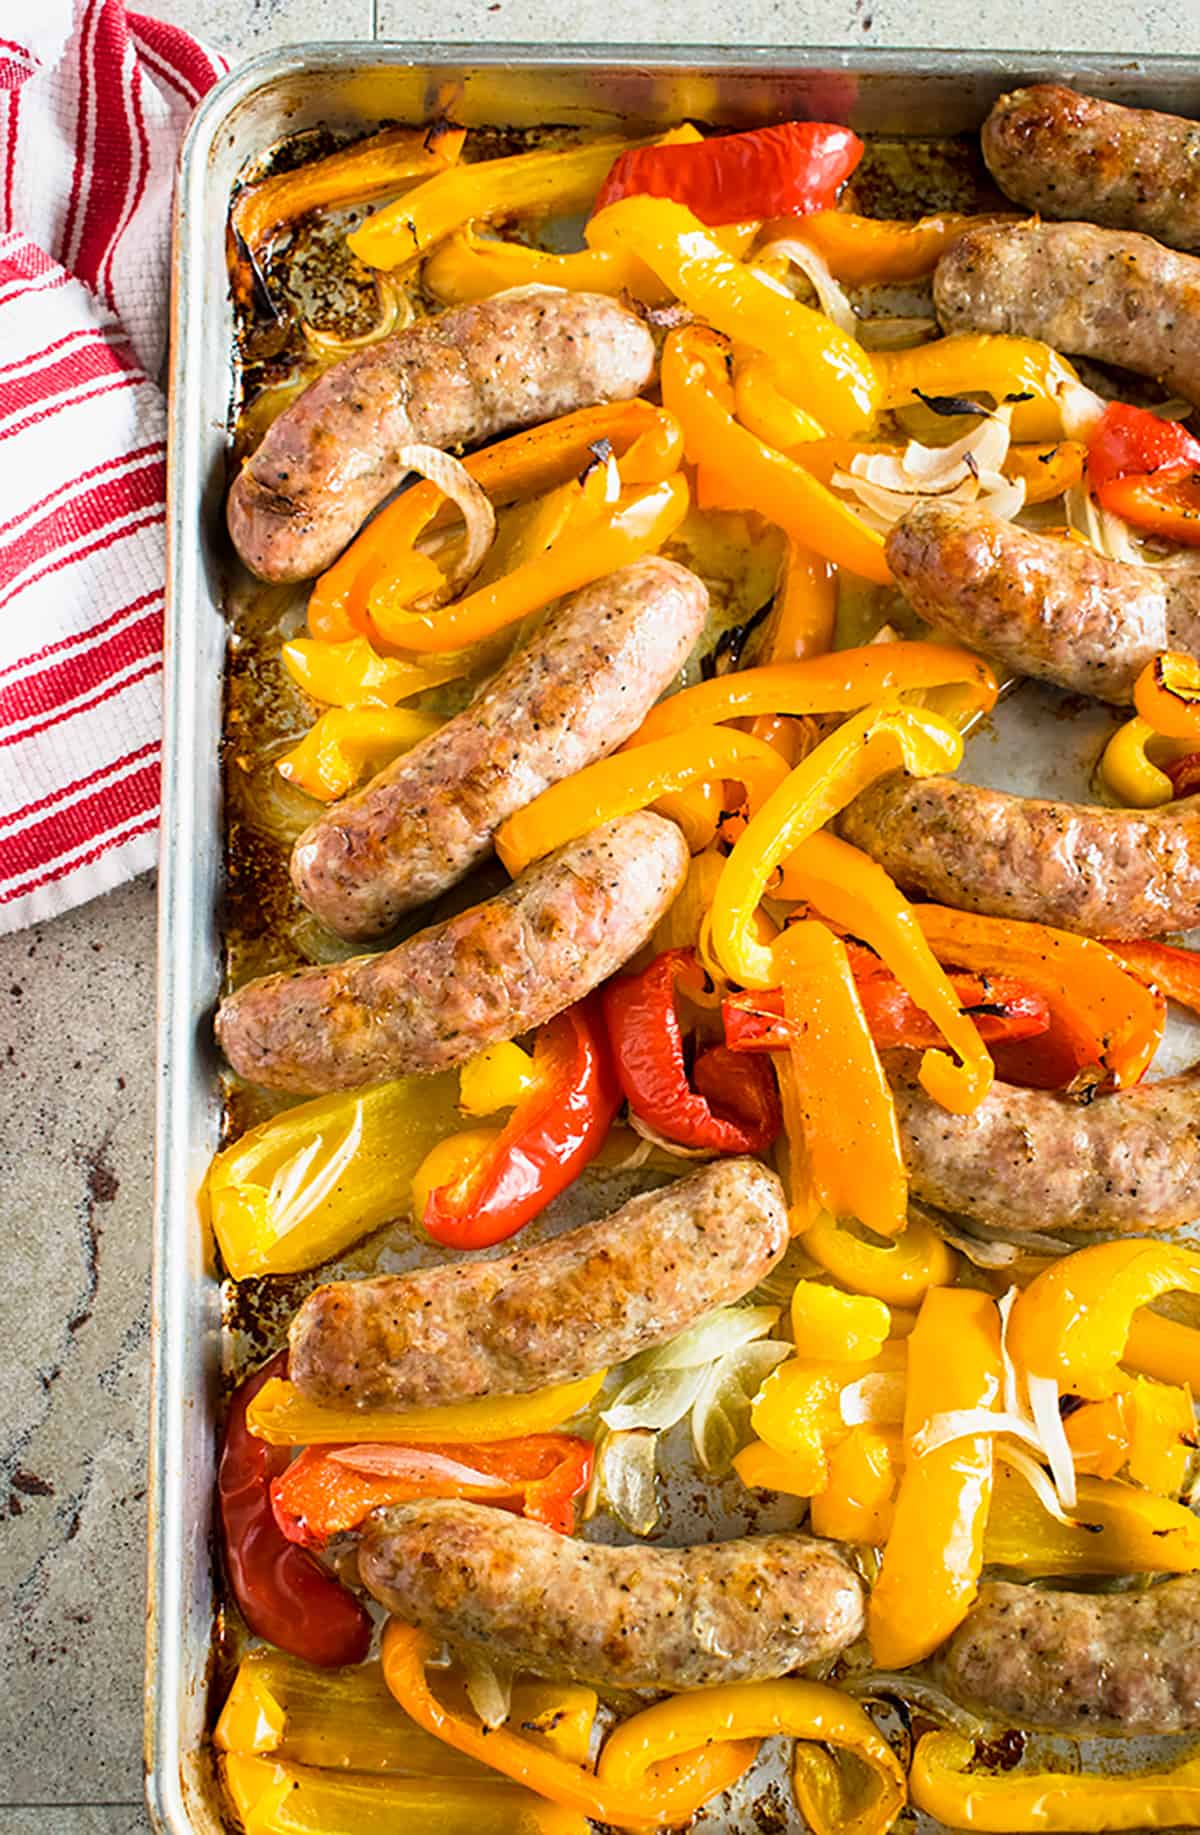 overhead view of cooked sausages, peppers, onions on sheet pan, white and red striped cloth